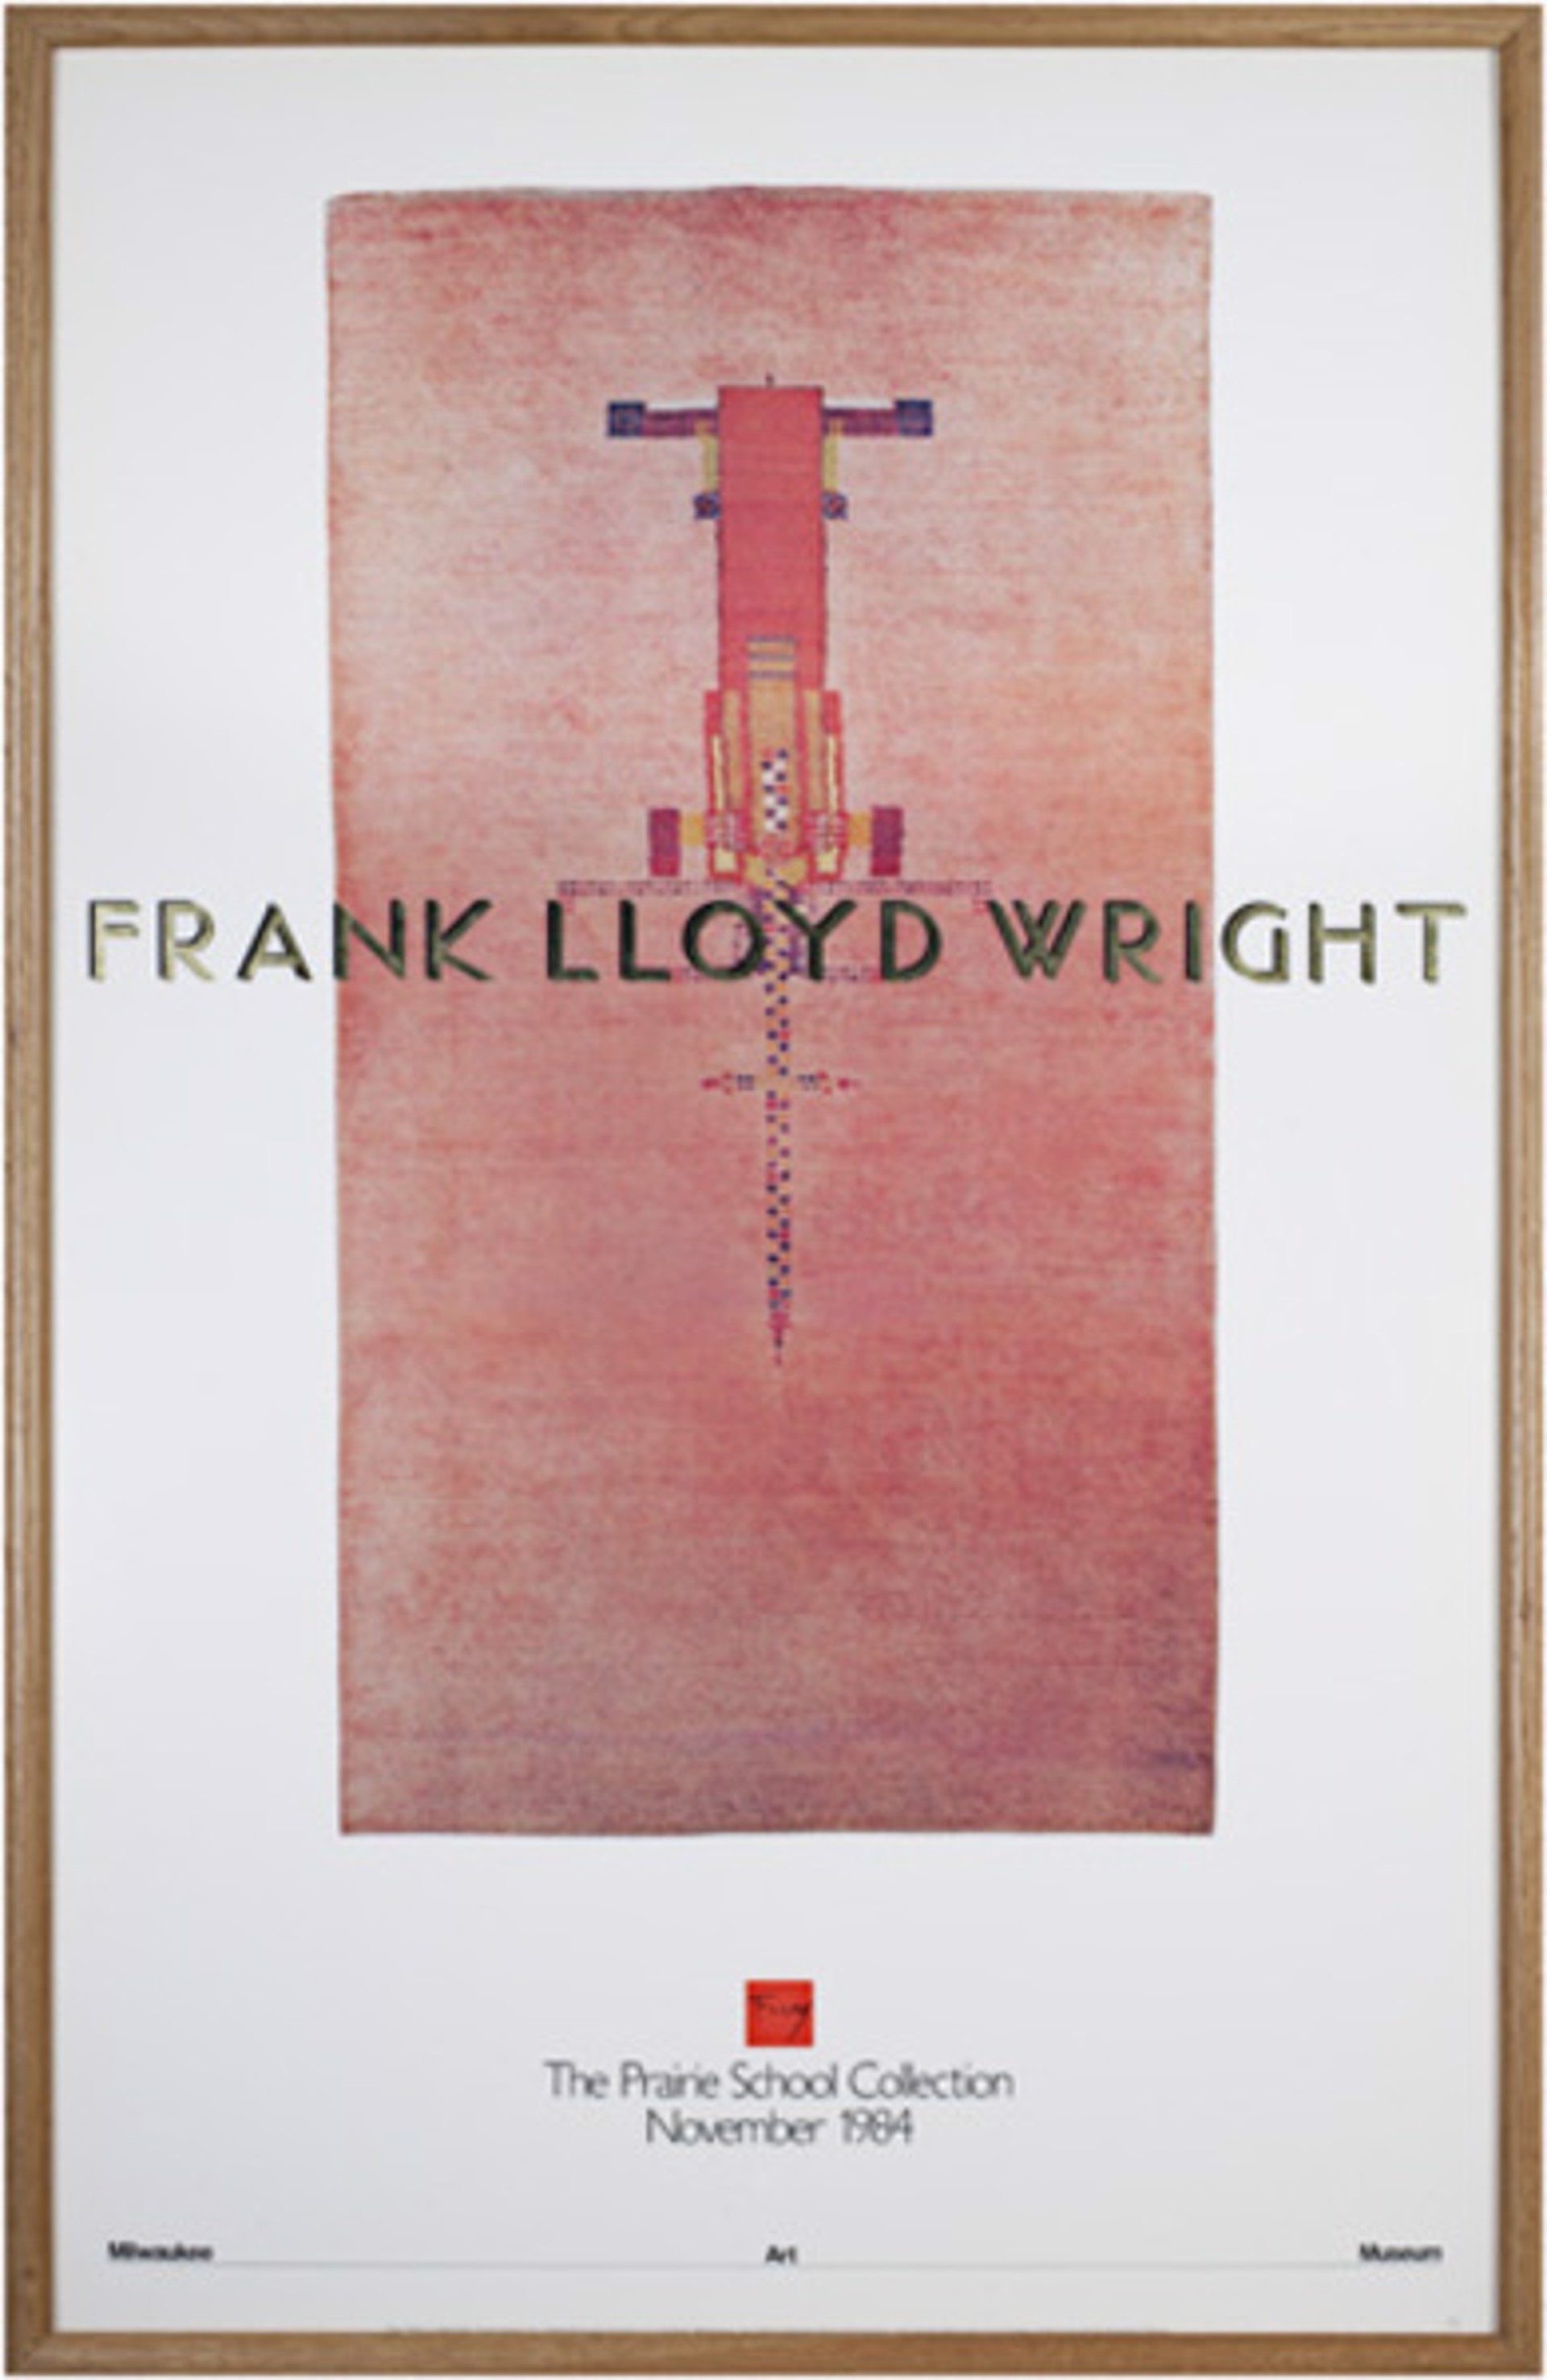 The Prairie School Collection-Rug by Frank Lloyd Wright